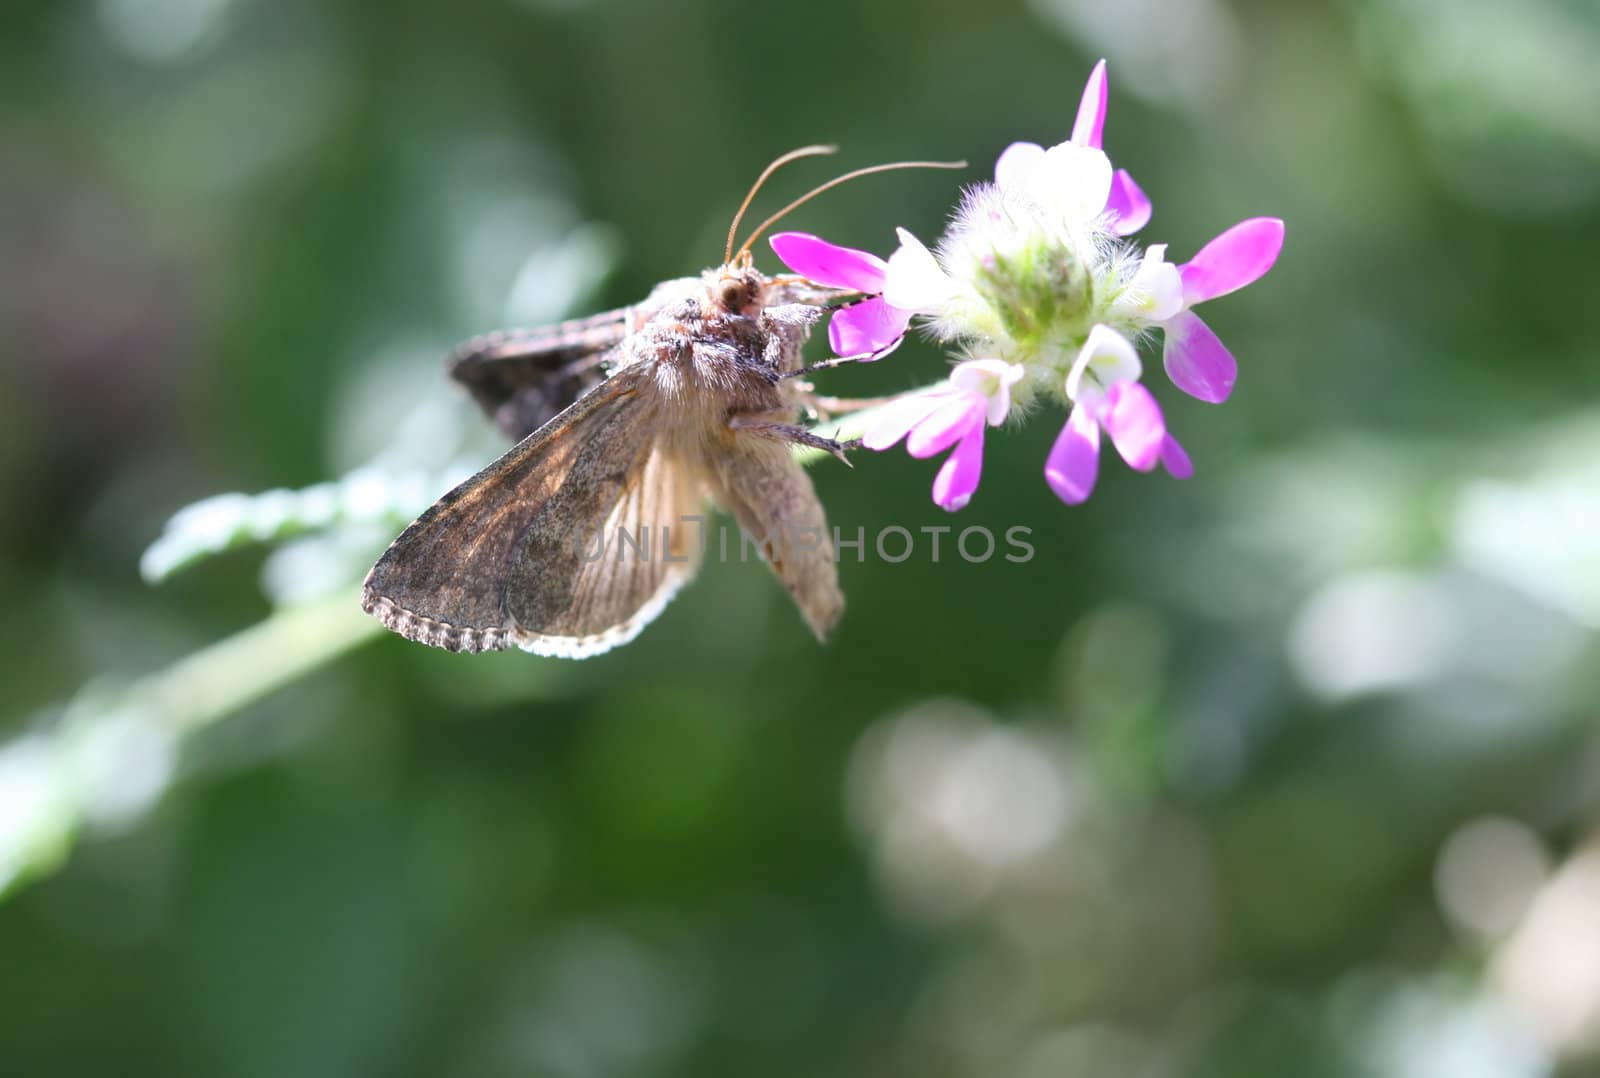 Close Up shot of a butterfly in mid flight feed on a flowers nectar